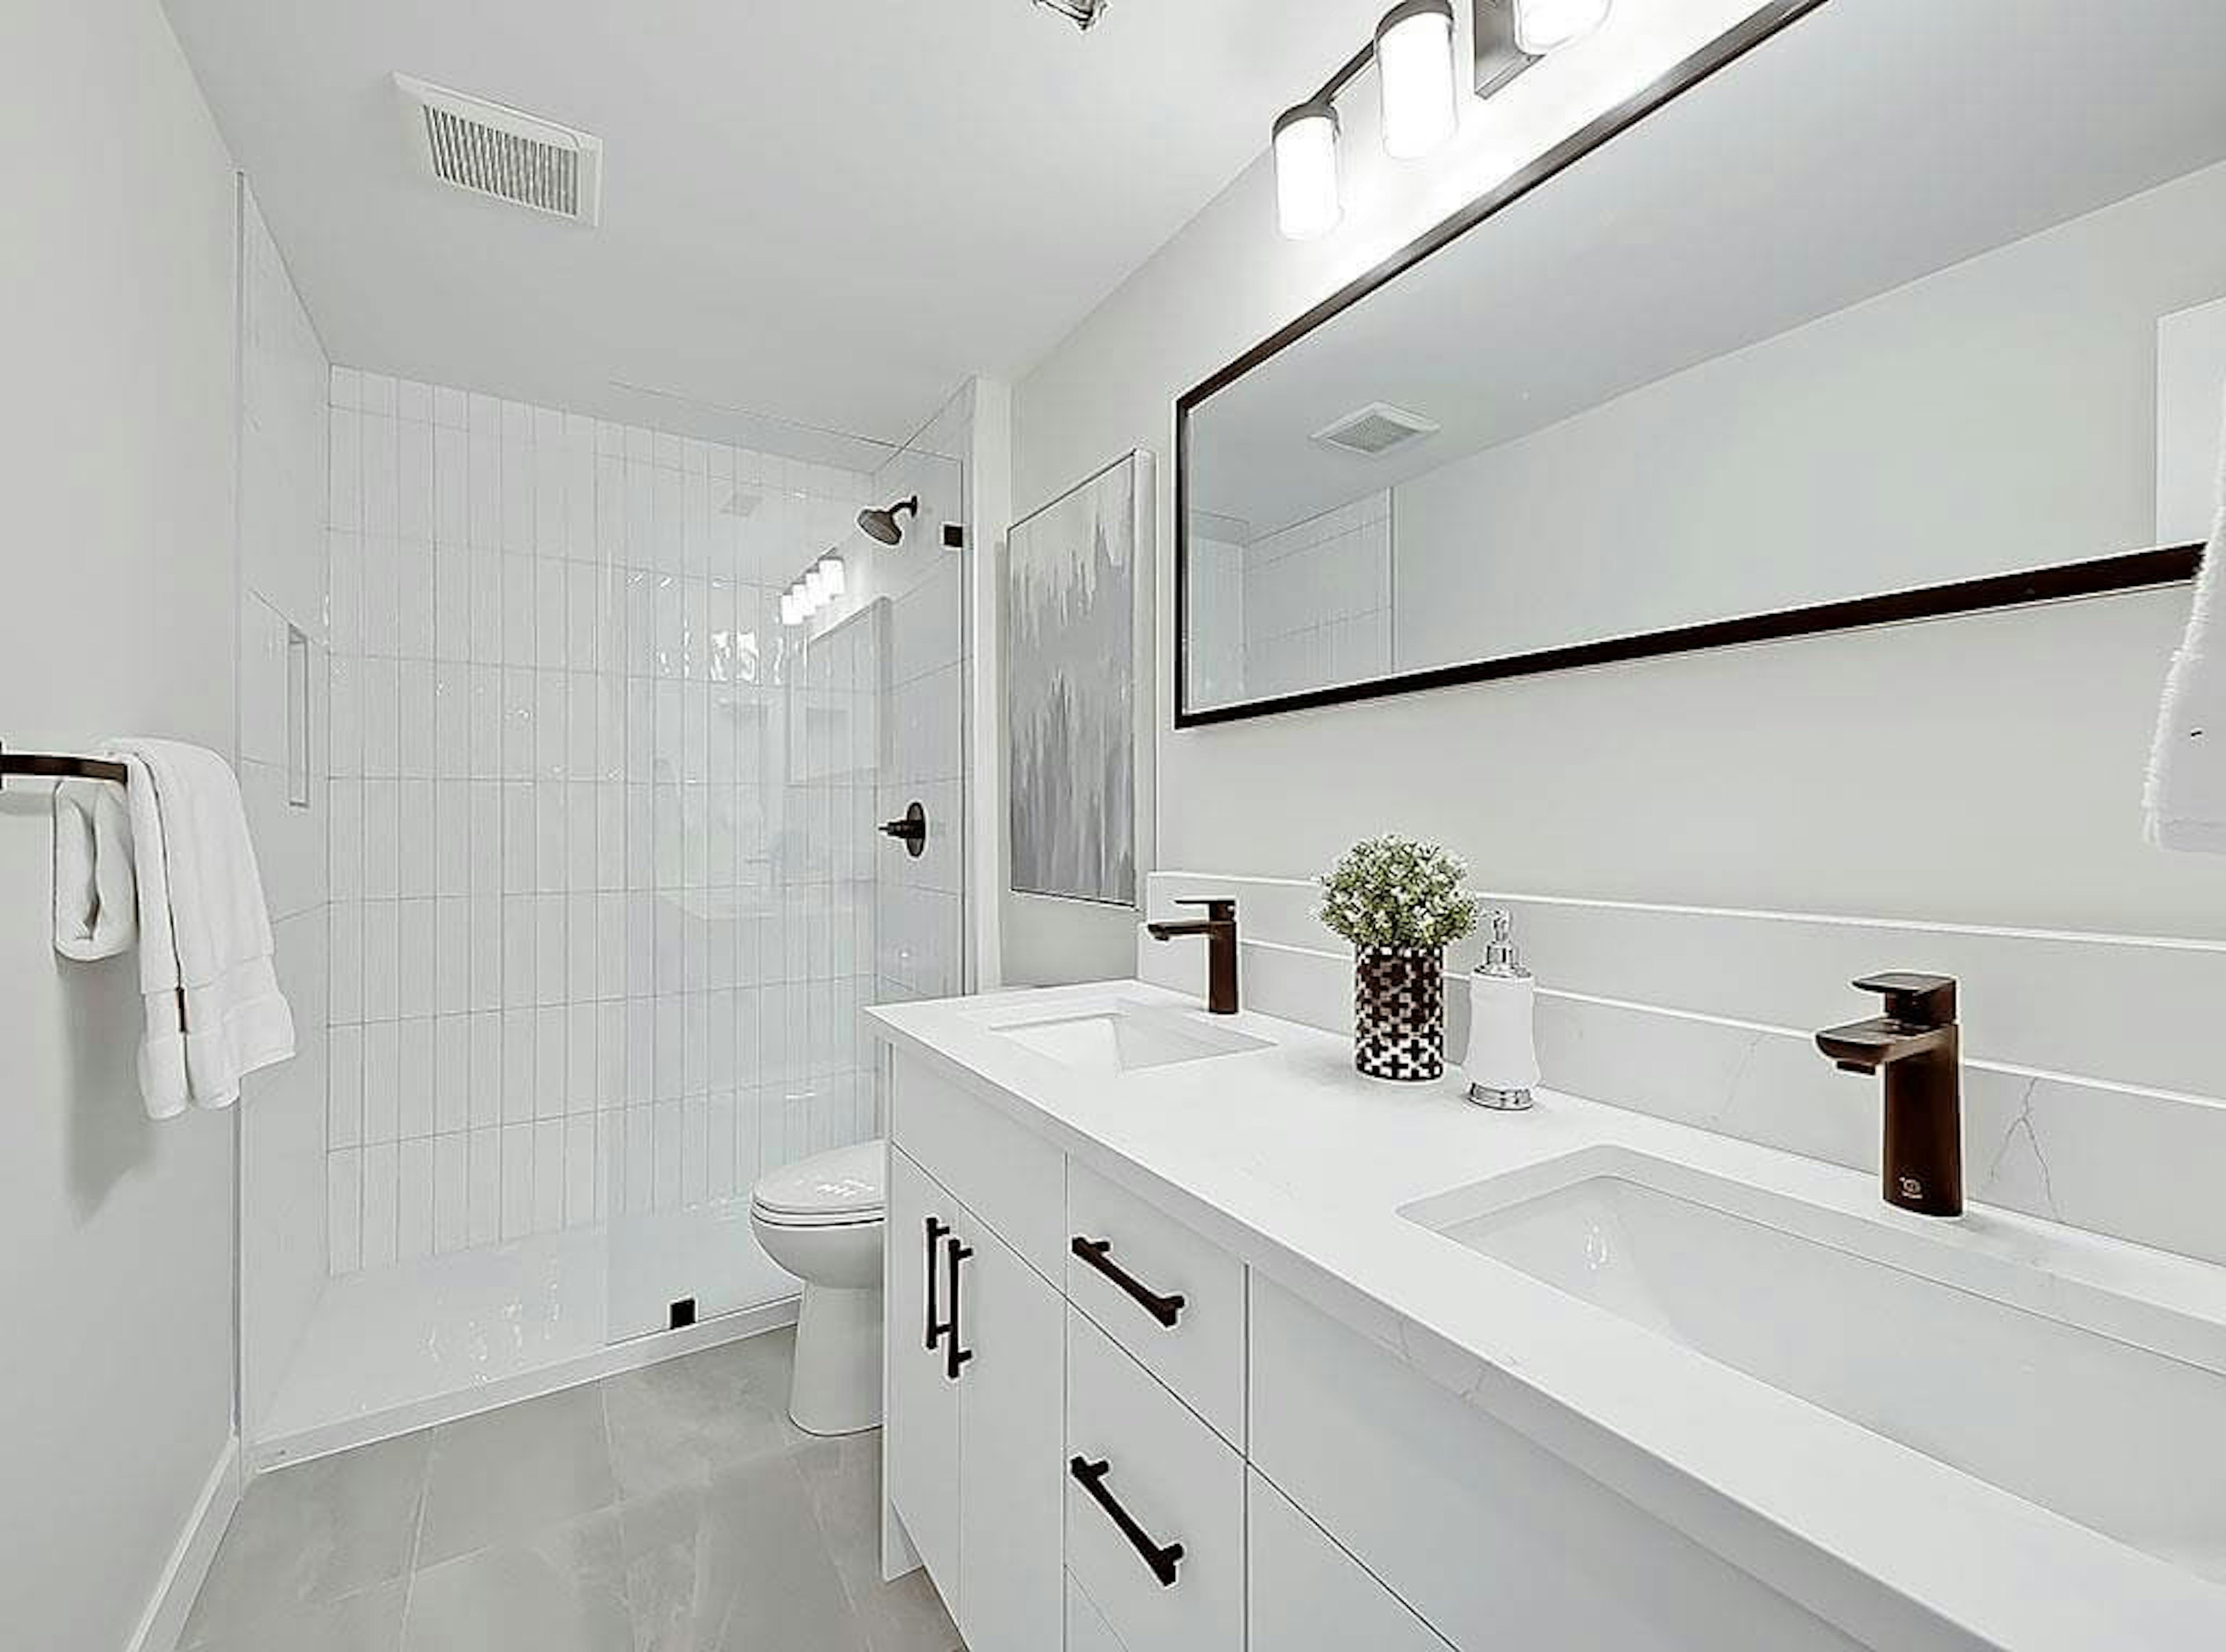 Why Choose In House Renovations to Renovate Your Bathroom?